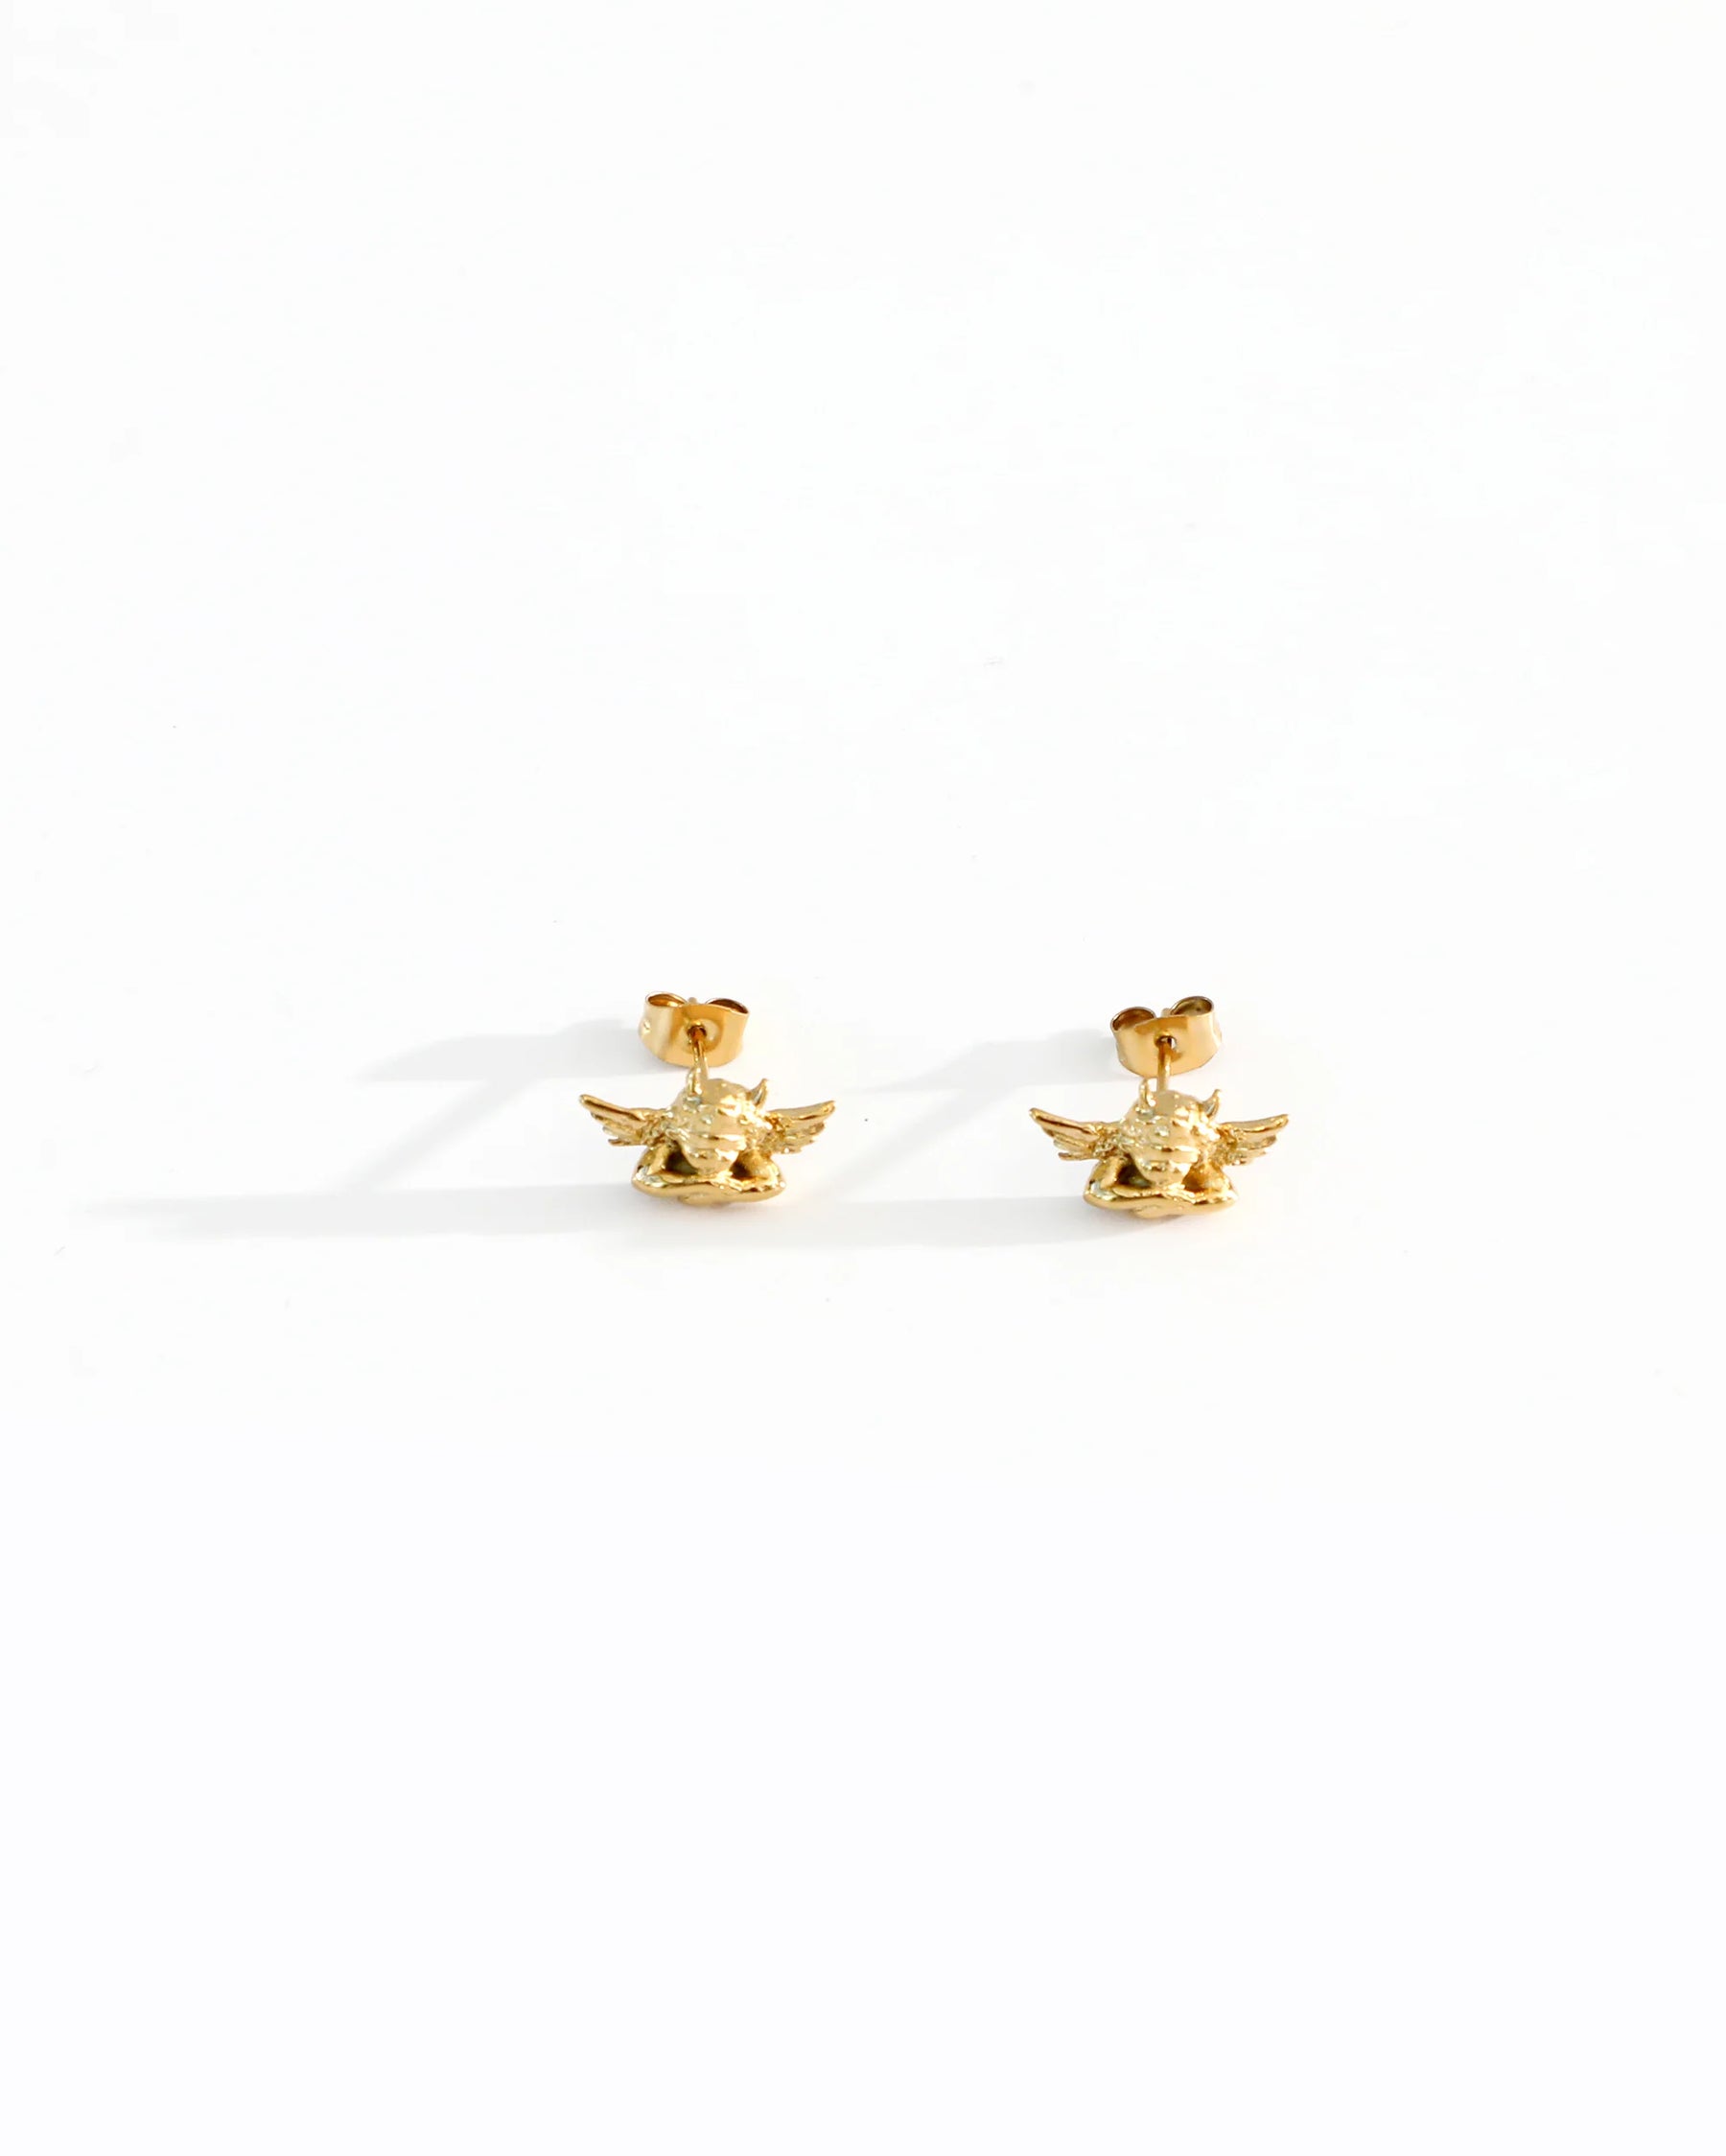 Update 190+ earrings for baby boy gold super hot